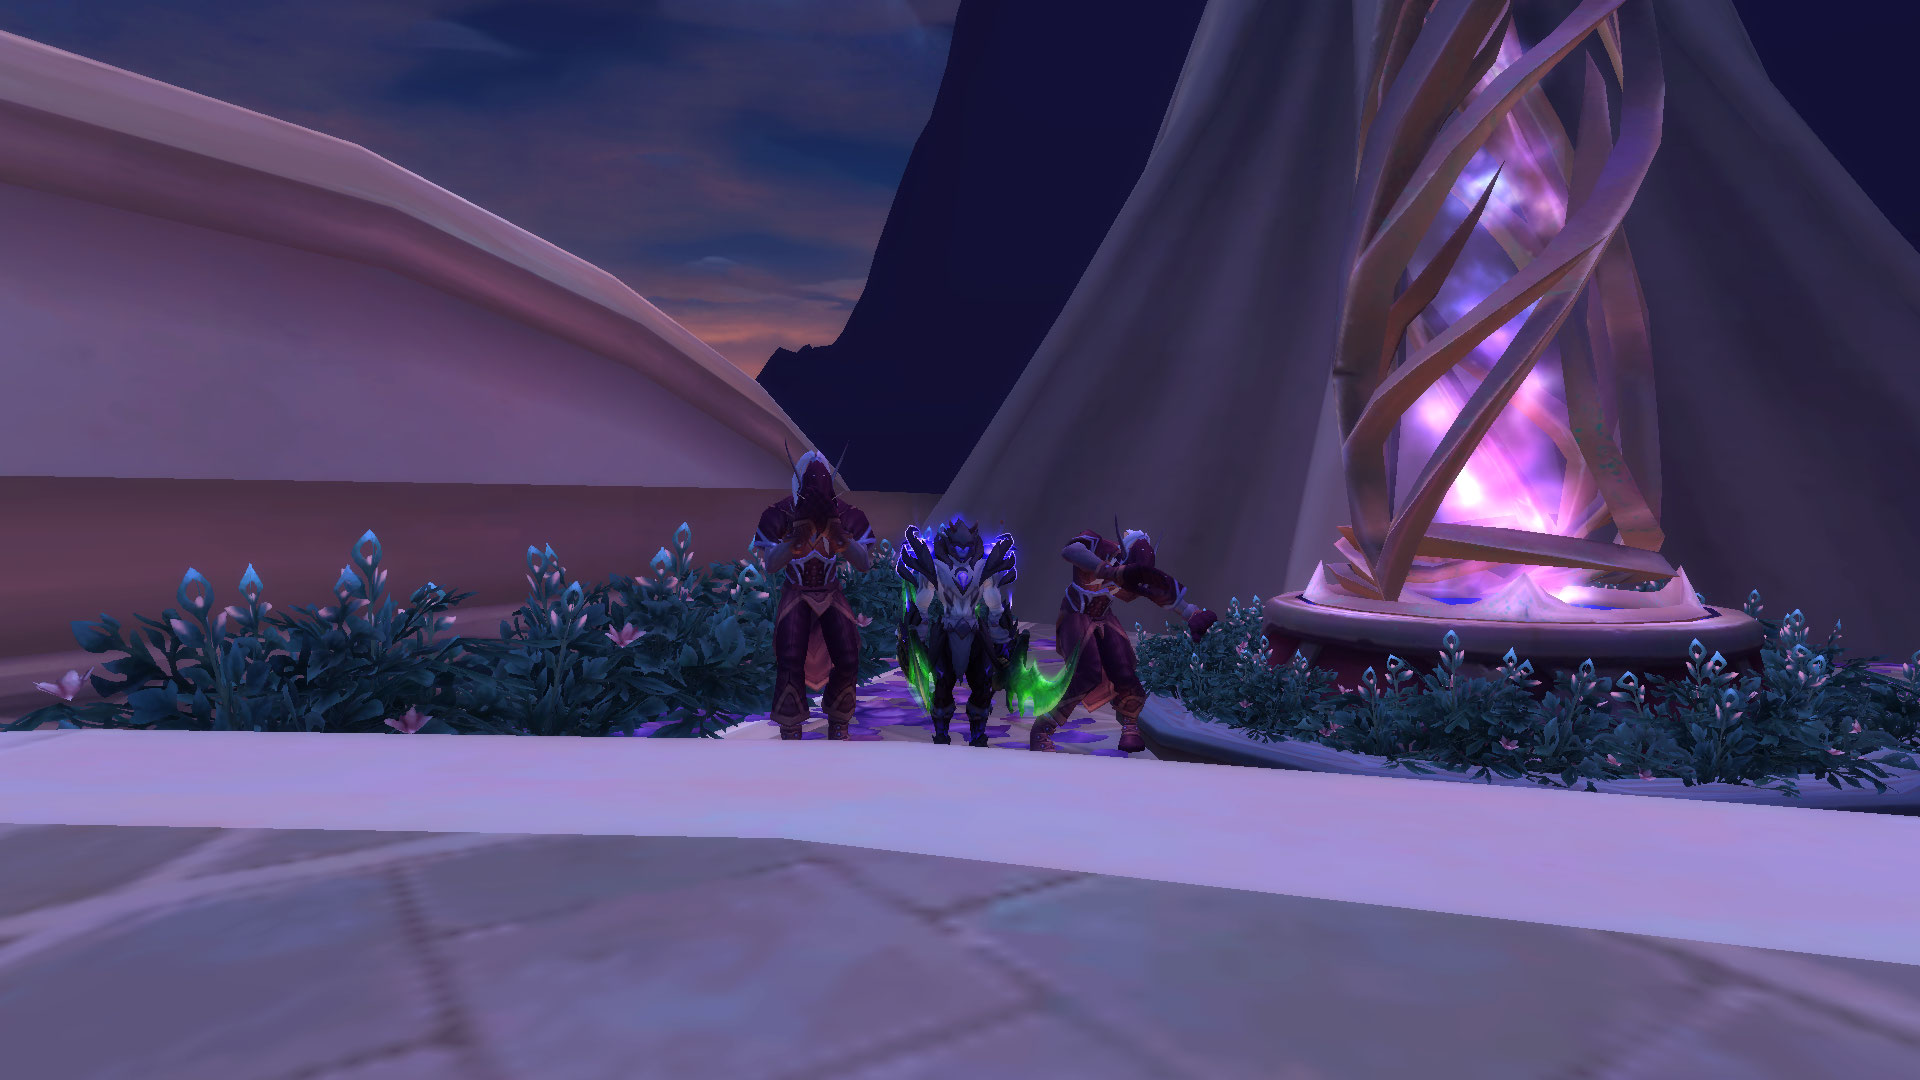 WoW the night elf and the frightened elves